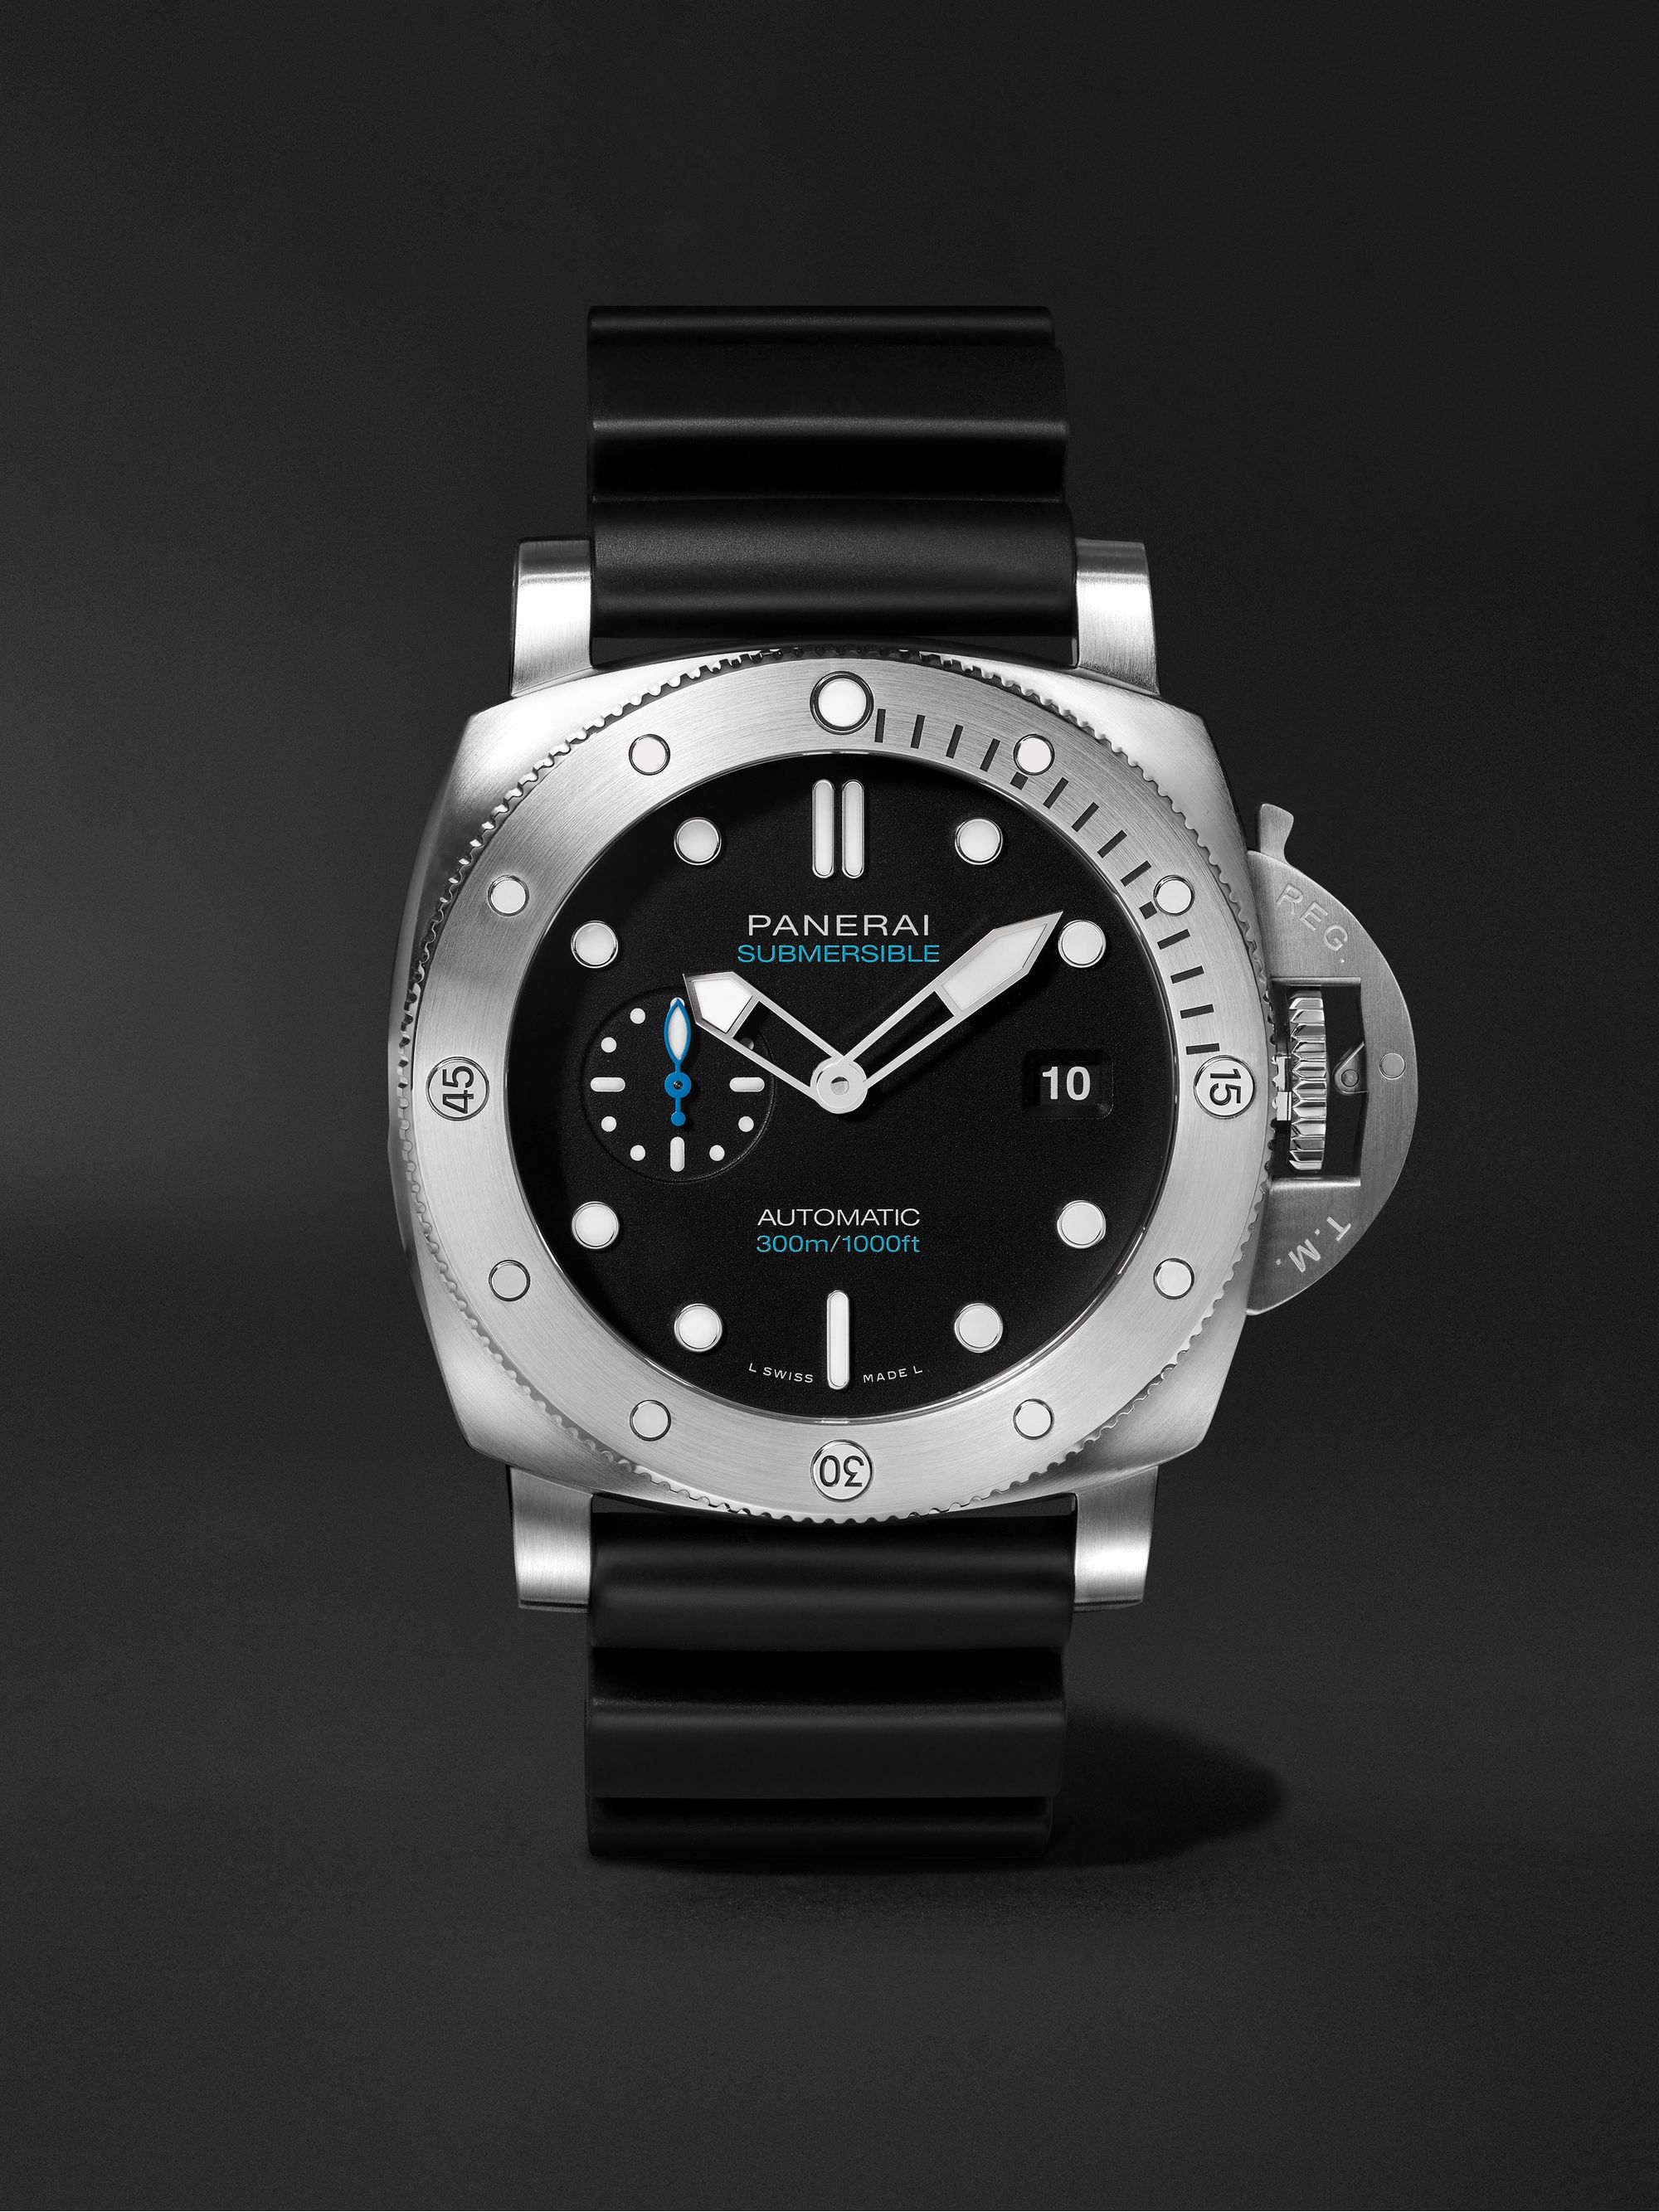 PANERAI Submersible QuarantaQuattro Automatic 44mm Brushed Stainless Steel and Rubber Watch, Ref. No. PAM01229